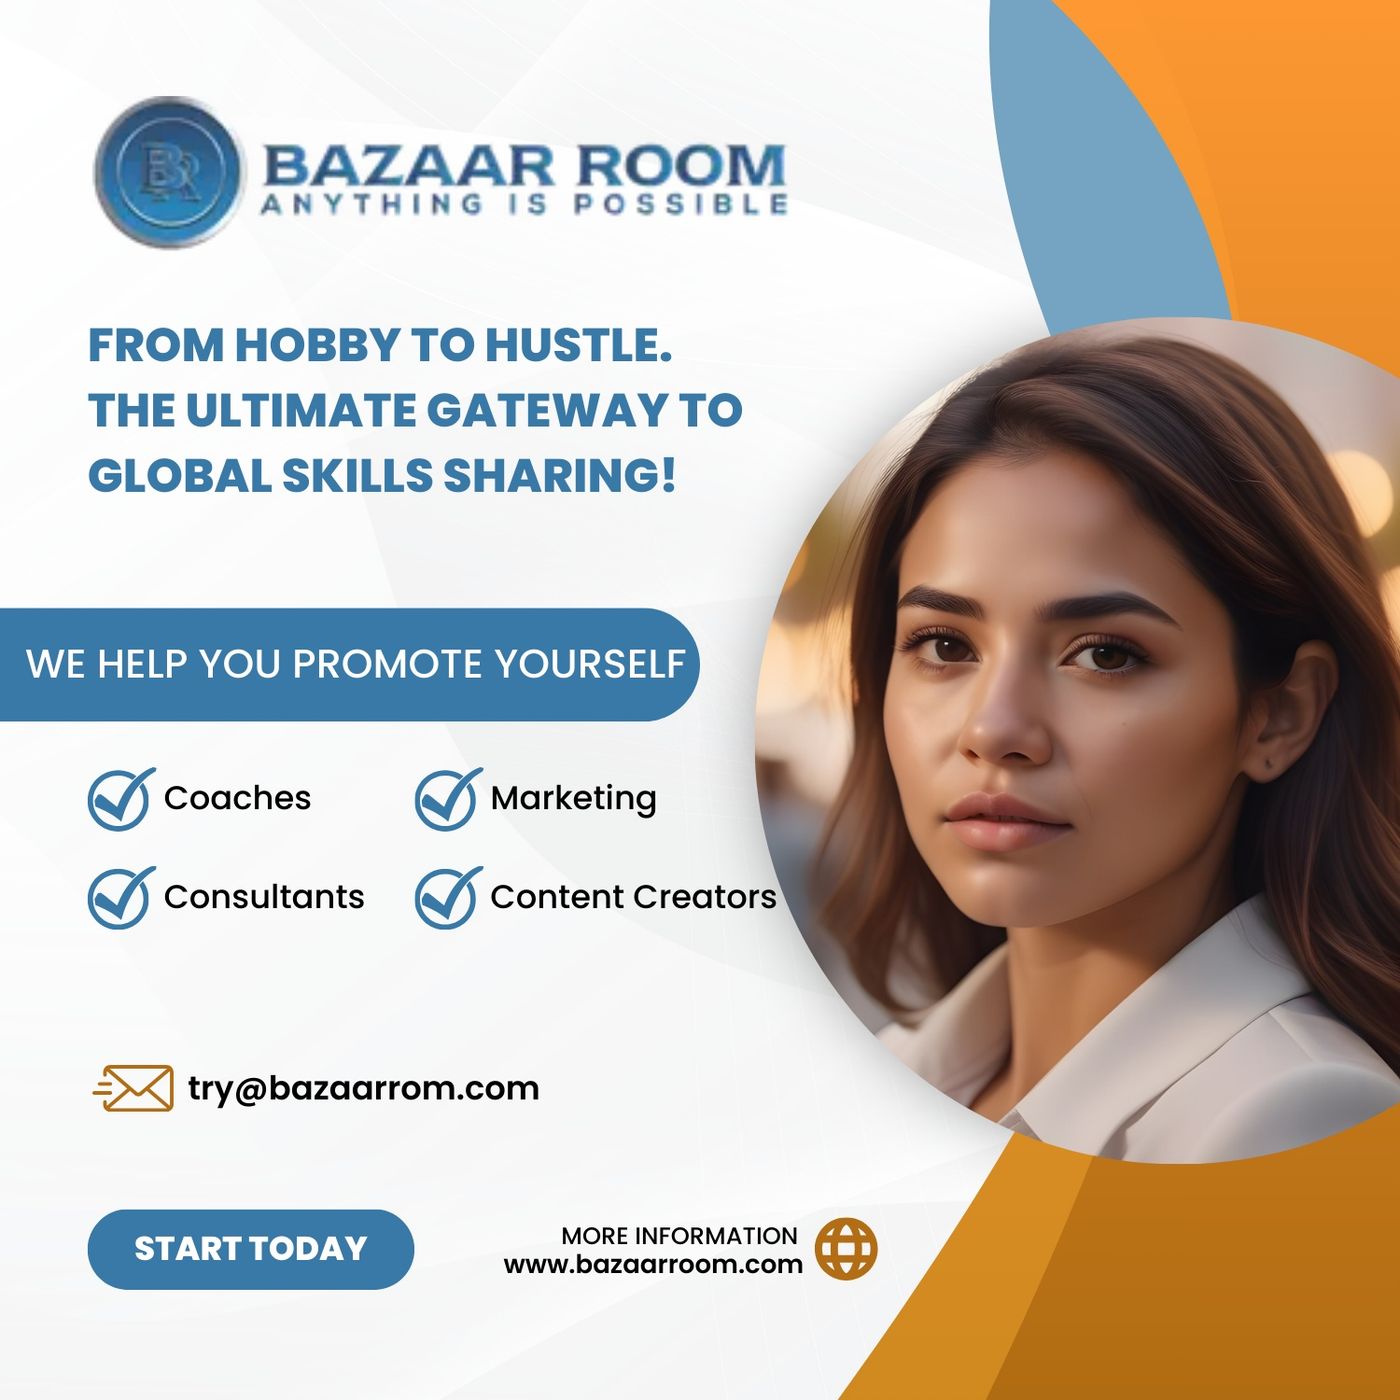 From Hobby to Hustle With Bazaar Room